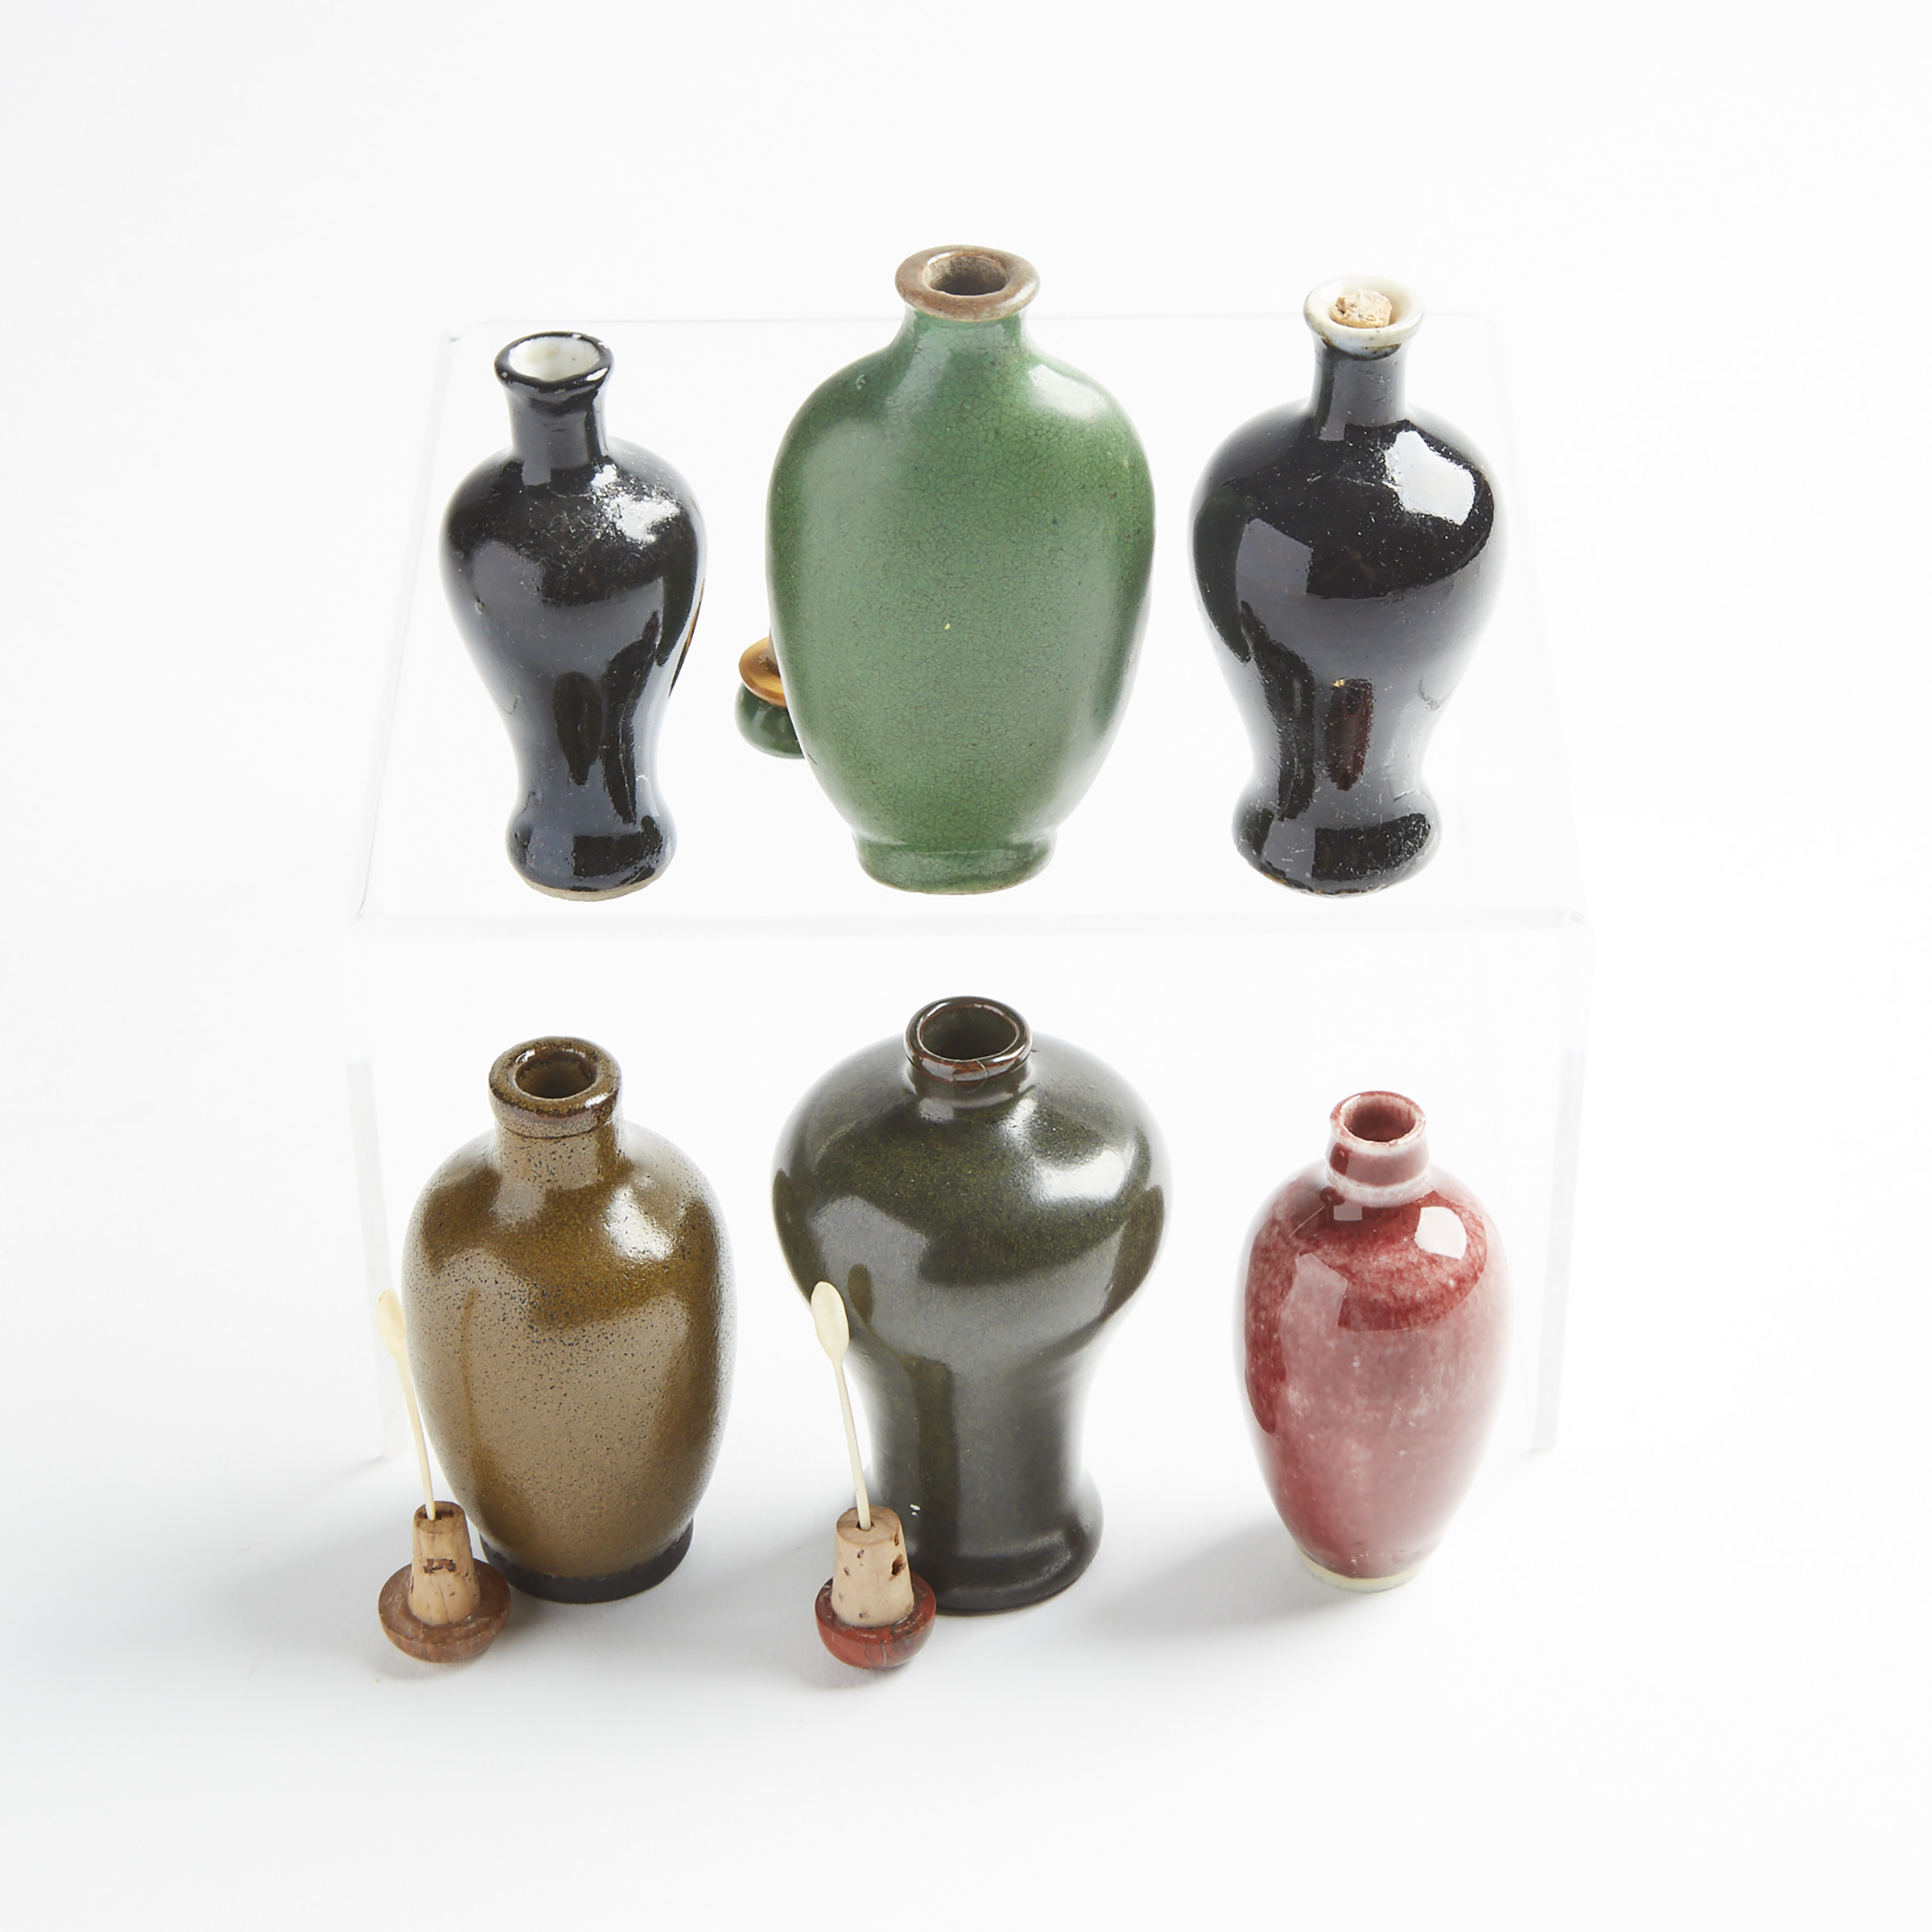 A Group of Six Monochrome Porcelain Snuff Bottles, 19th/Early 20th Century